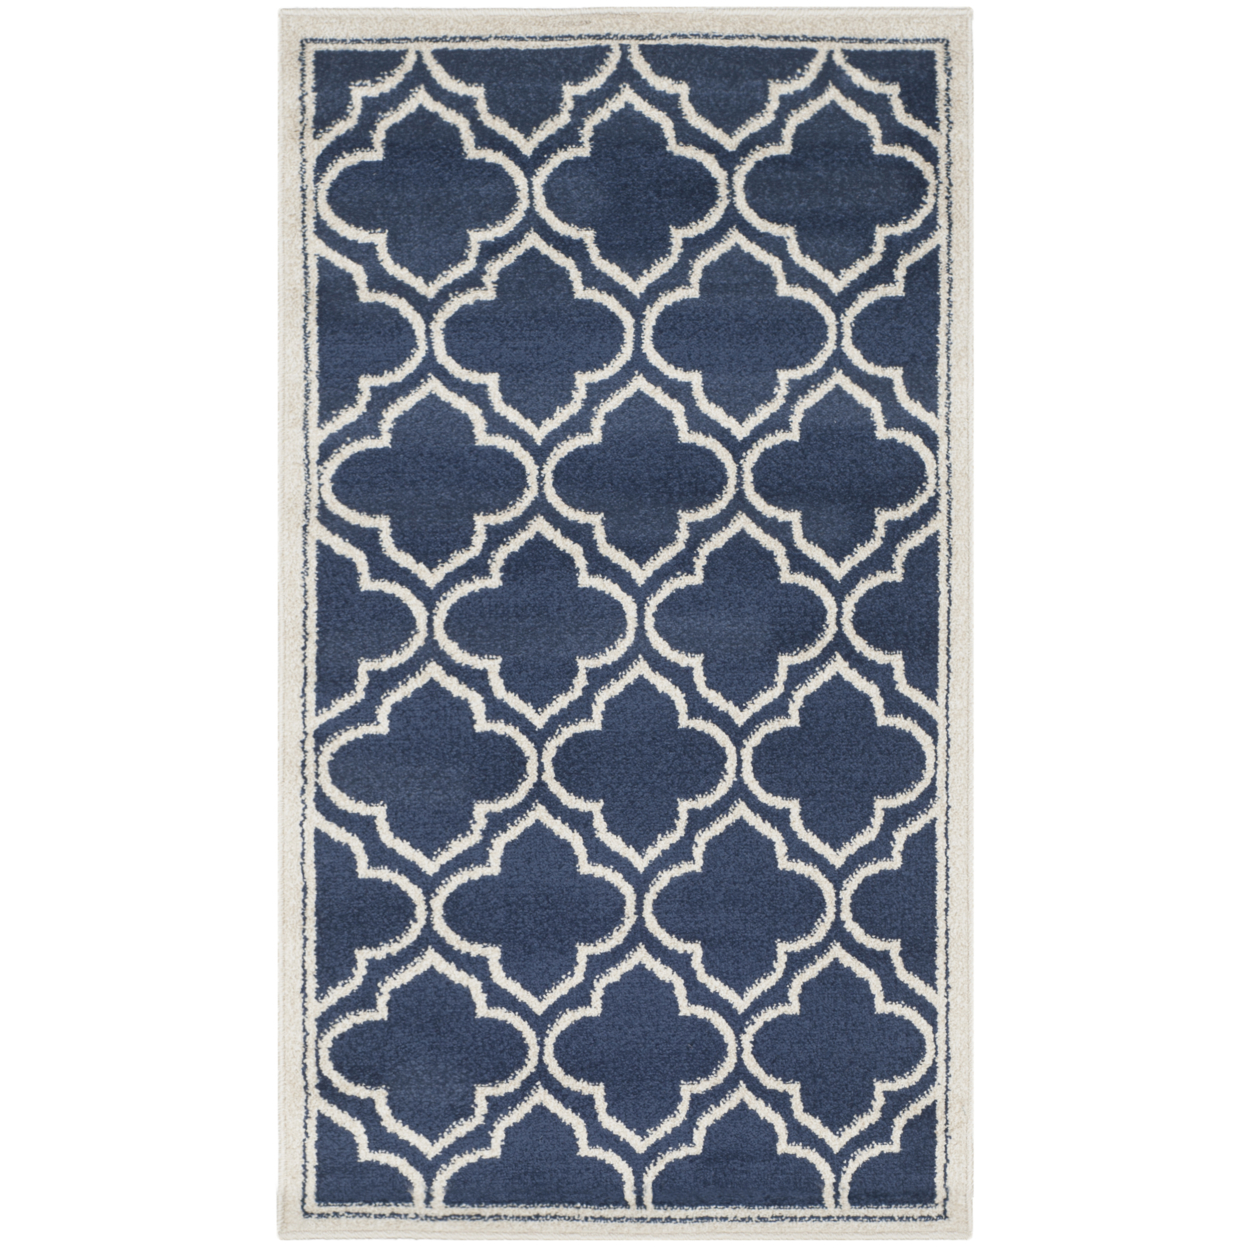 SAFAVIEH Amherst Collection AMT412P Navy / Ivory Rug - 2' 6 X 4'